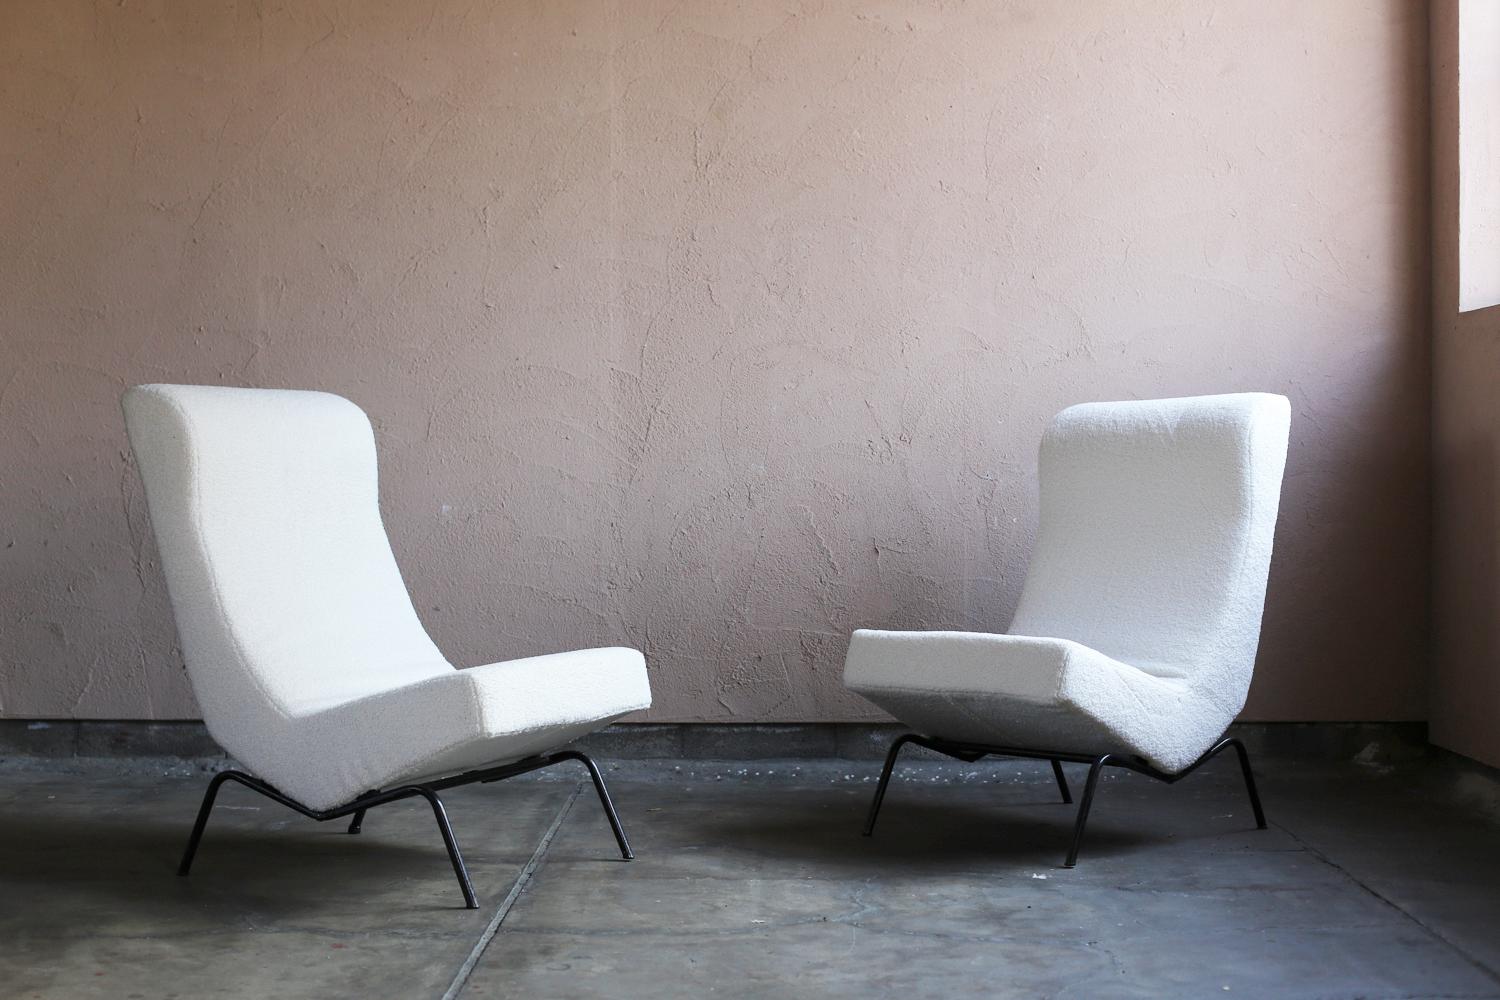 A pair of armchairs with a distinctive mid-20th century design, model CM 194. This pair of chairs is an early piece designed by visionary designer Pierre Paulin for the French Thonet furniture company around 1958. This chair set features an